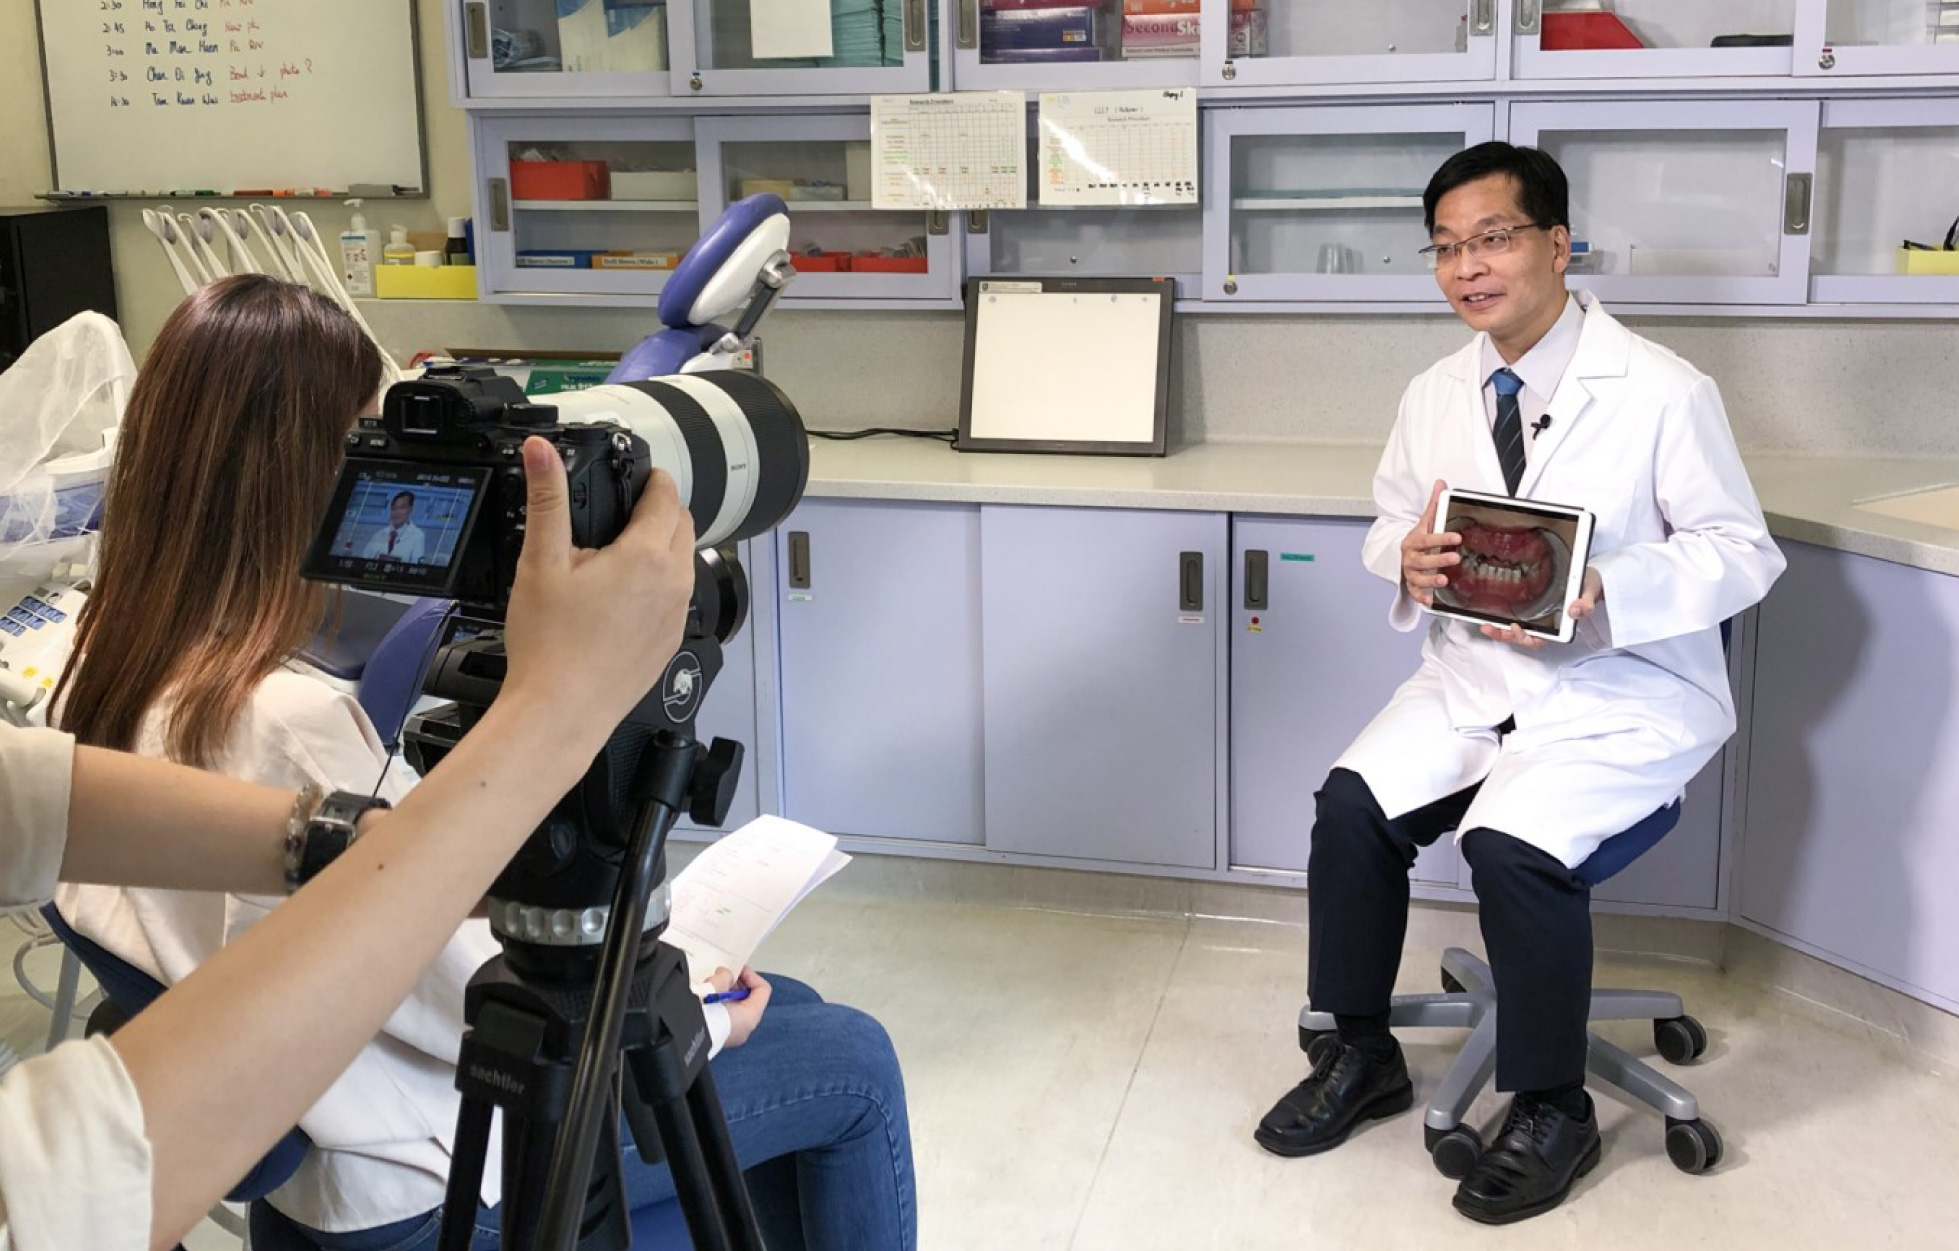 Professor CH Chu explained to media the importance of deciduous teeth